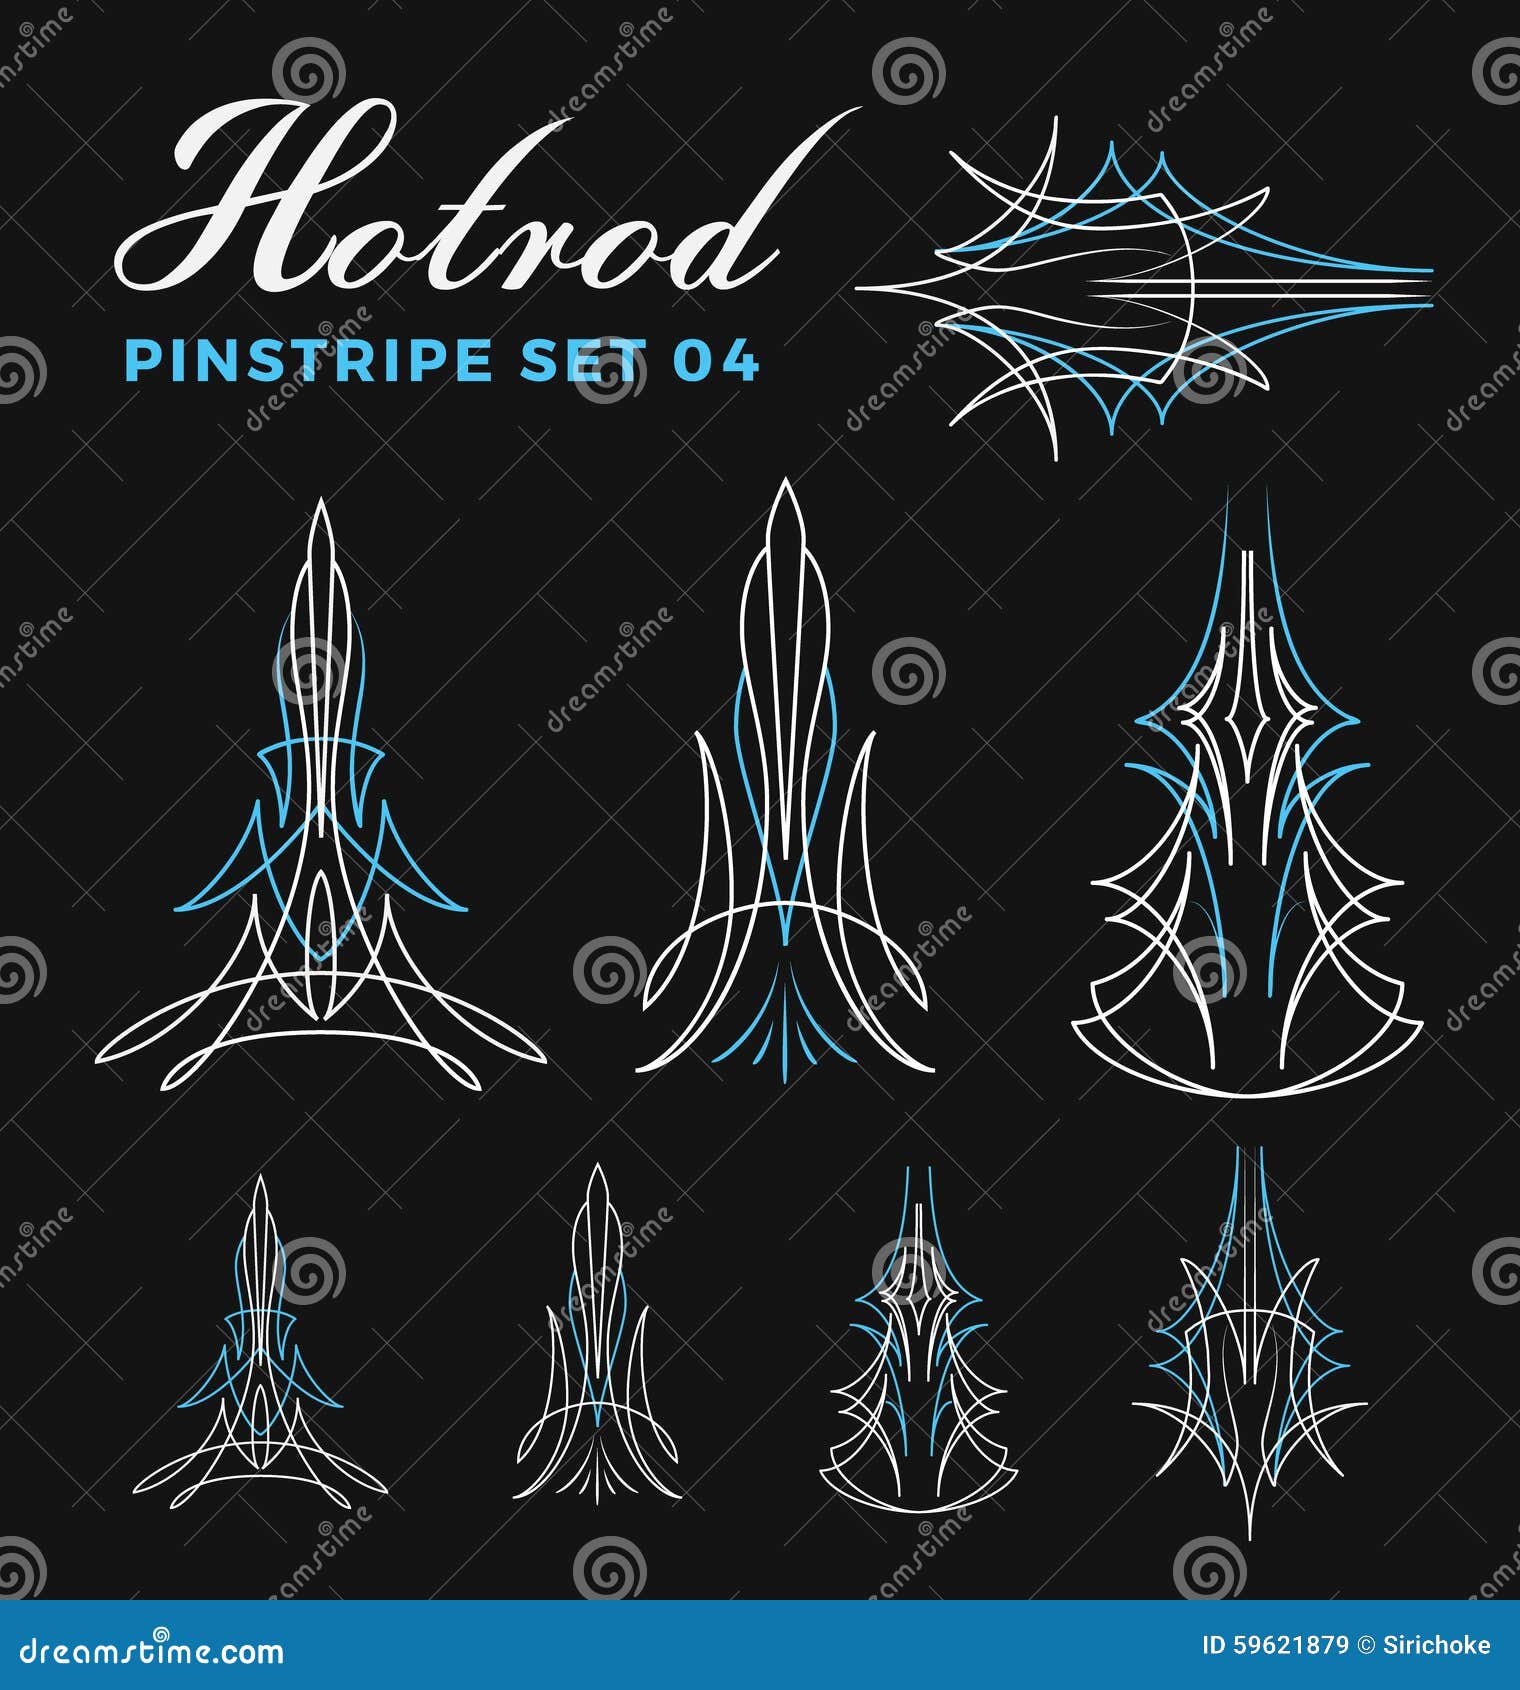 Set Of Vintage Pin Striping Line  Art  Stock Vector Image 